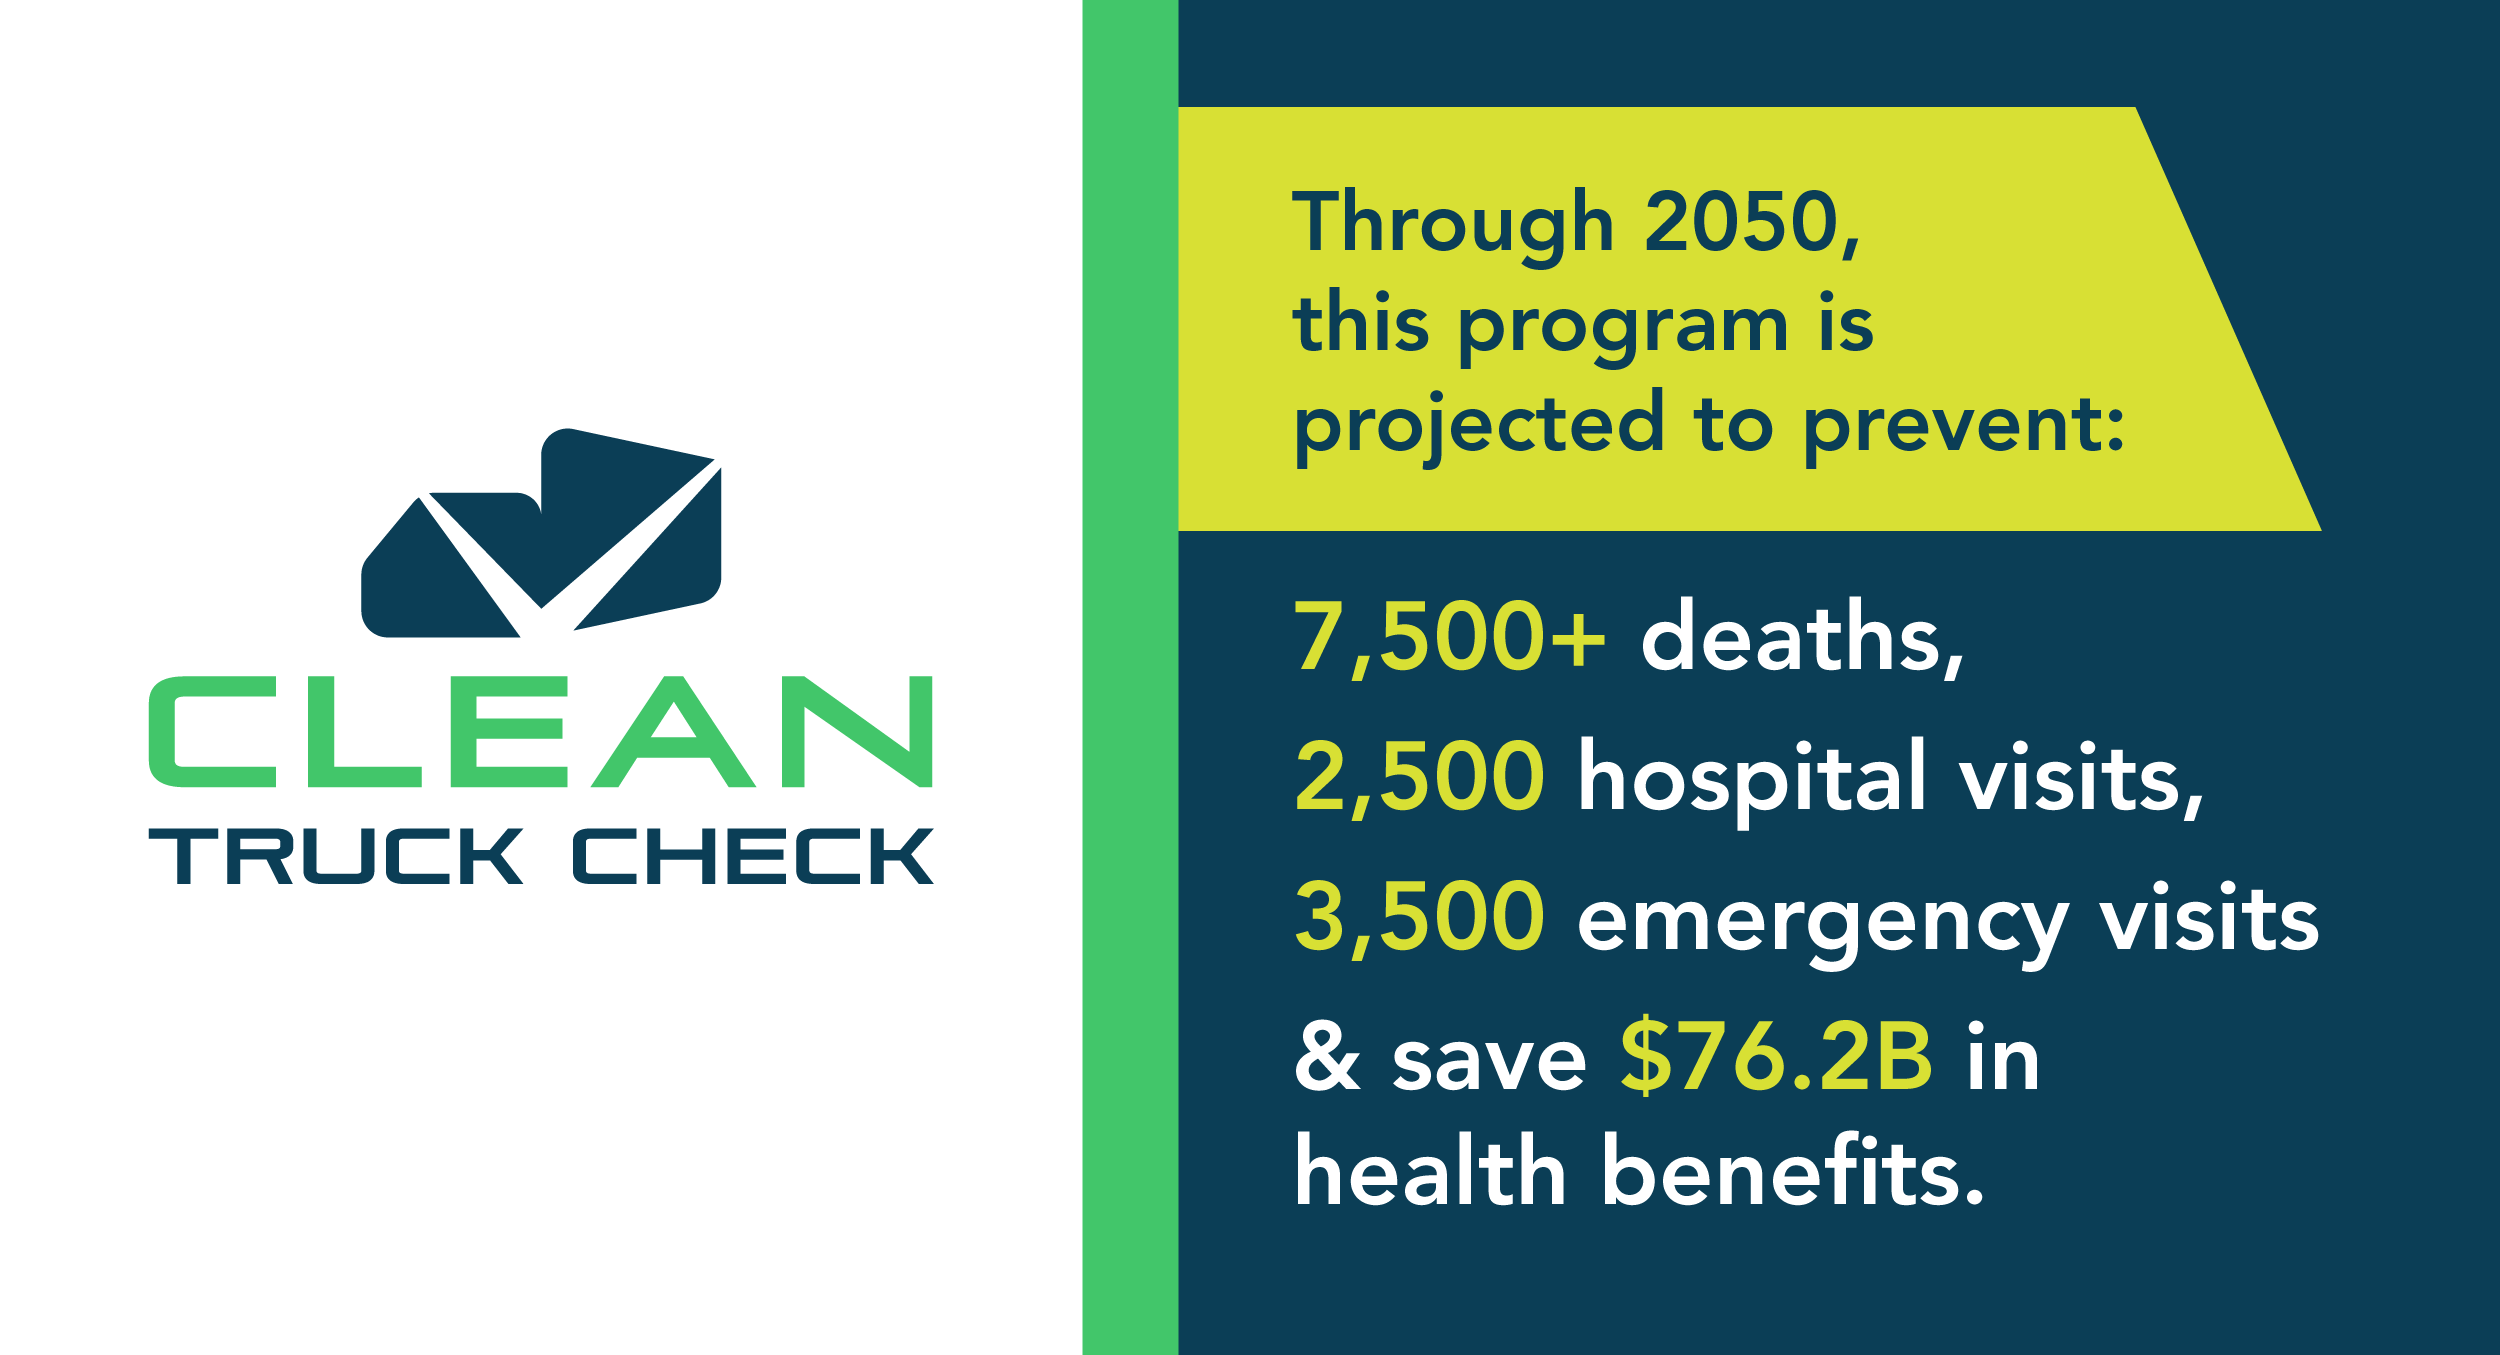 Through 2050, this program is projected to prevent: 7,500 deaths, 2,500 hospital visits, 3,500 emergency visits & save $76.2B in health benefits